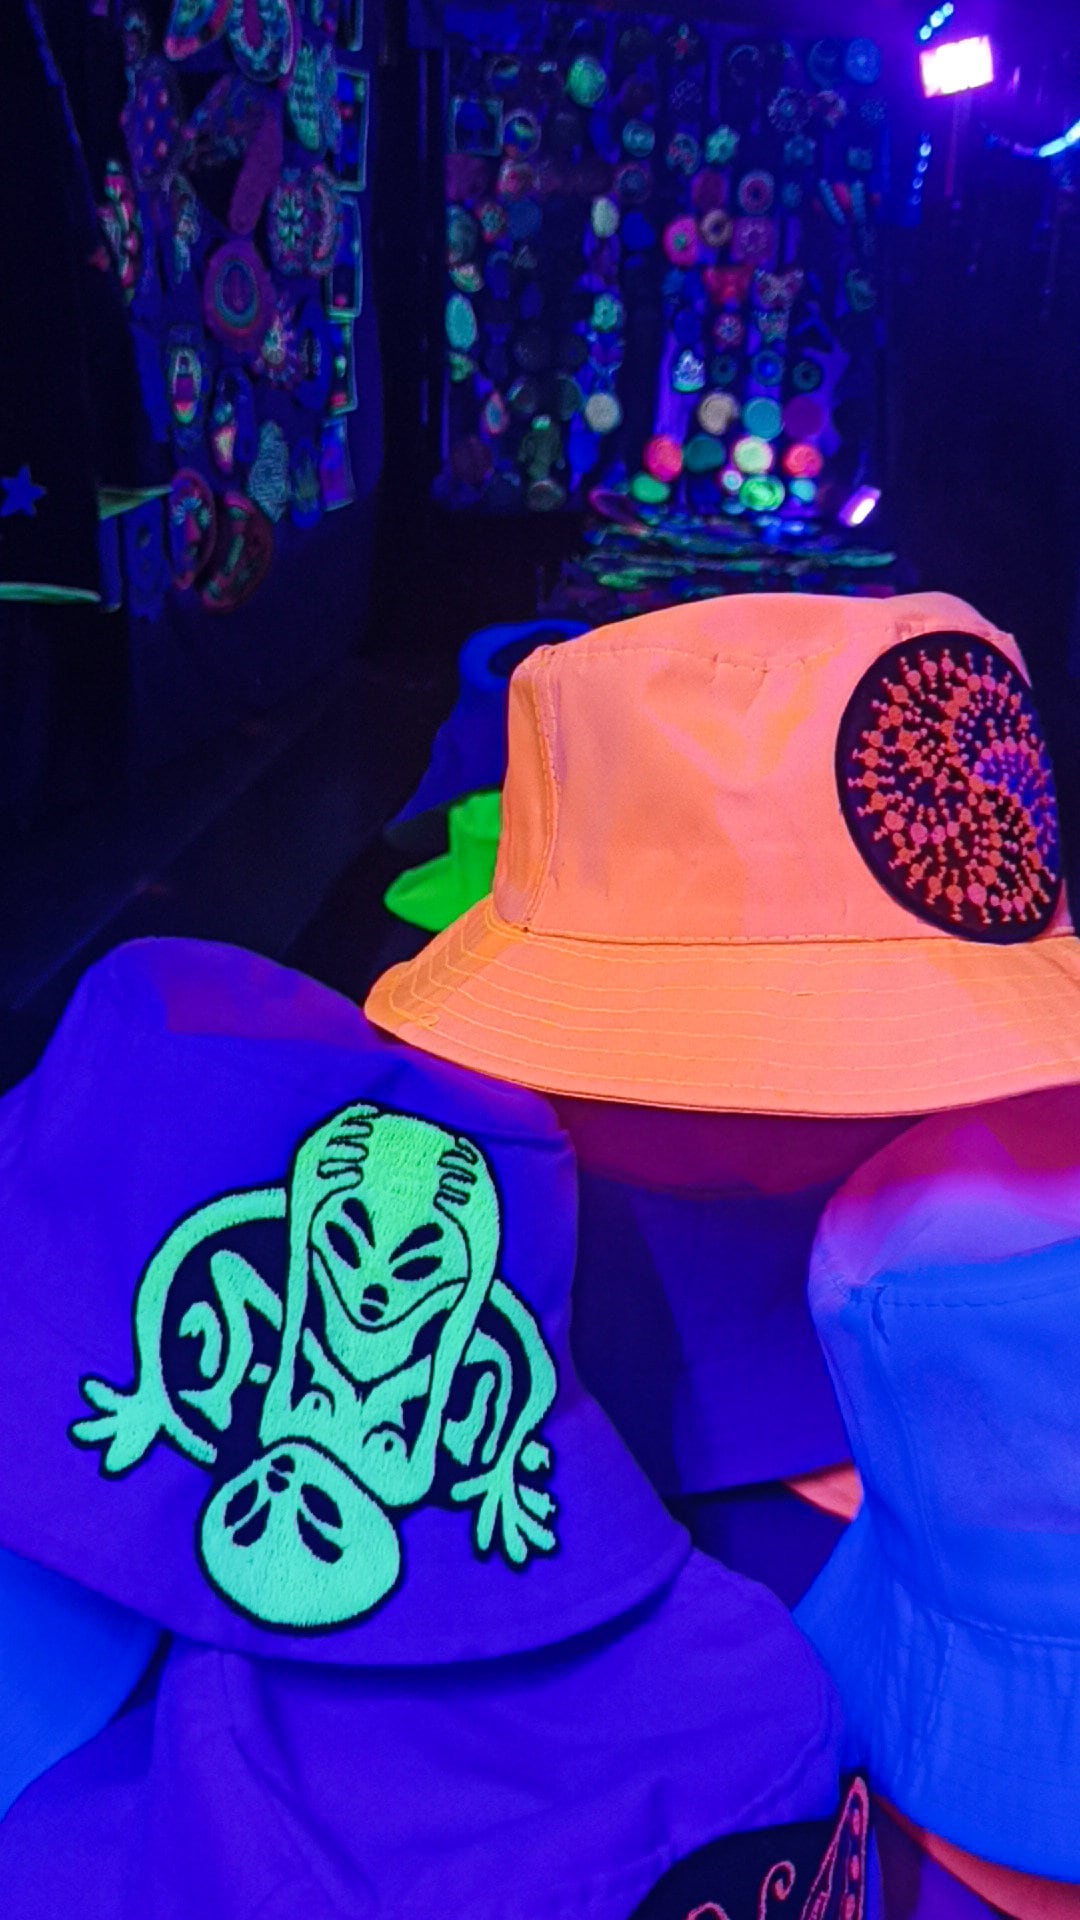 Alien Love UV Purple Fisher Hat blacklight glowing with embroidery patch psychedelic trance goatrance hippie fisherhat Funny Goa Gear